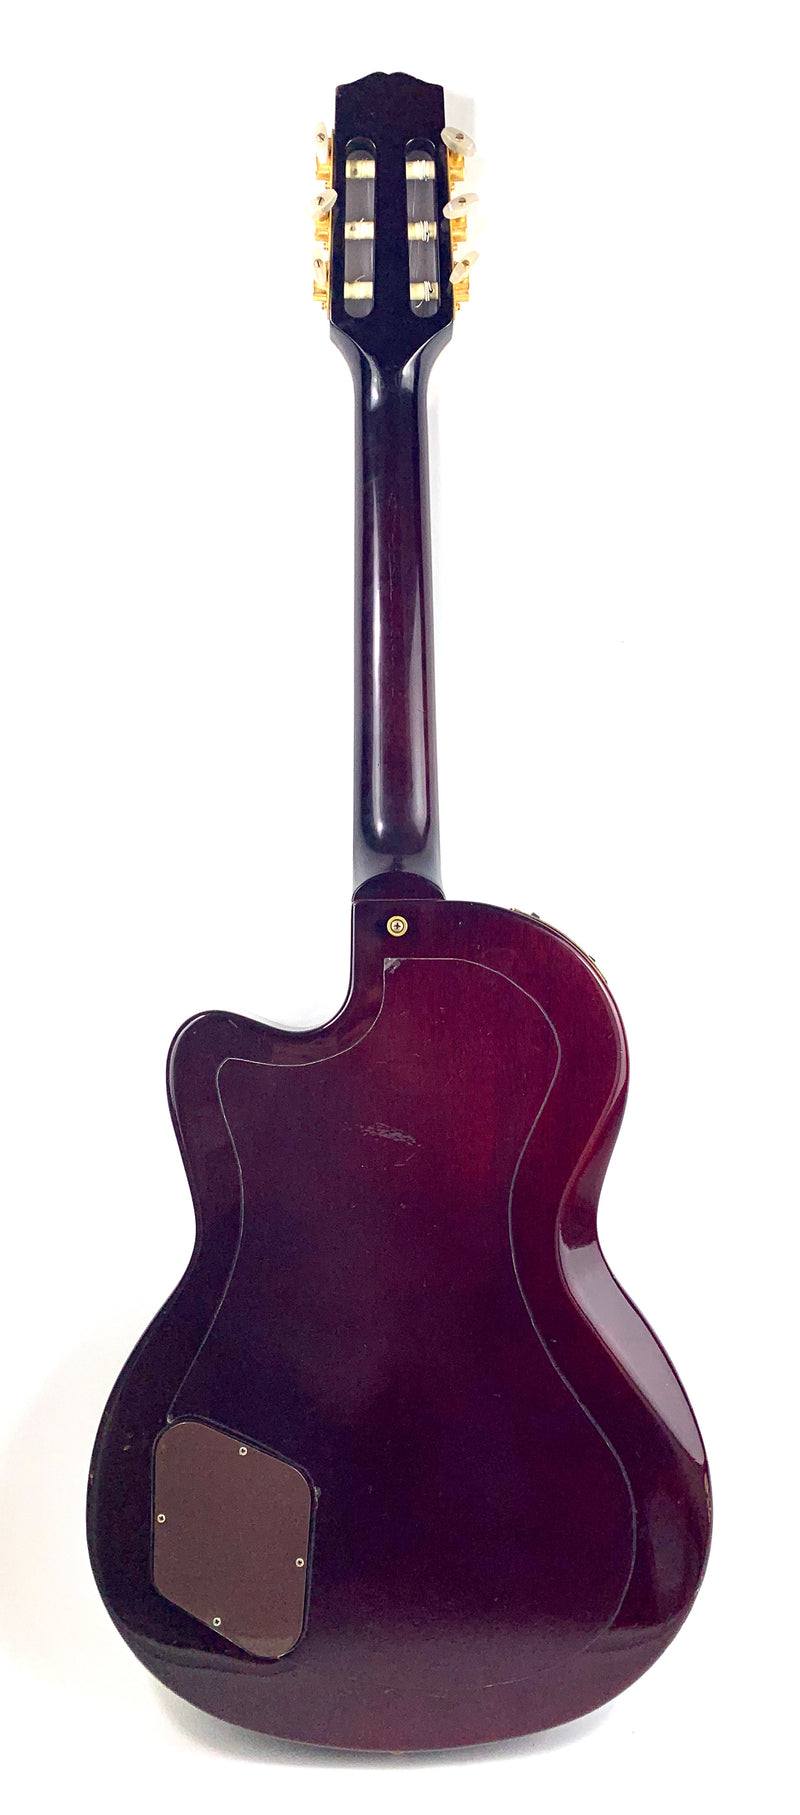 Gibson Chet Atkins CE Wine Red from 1999